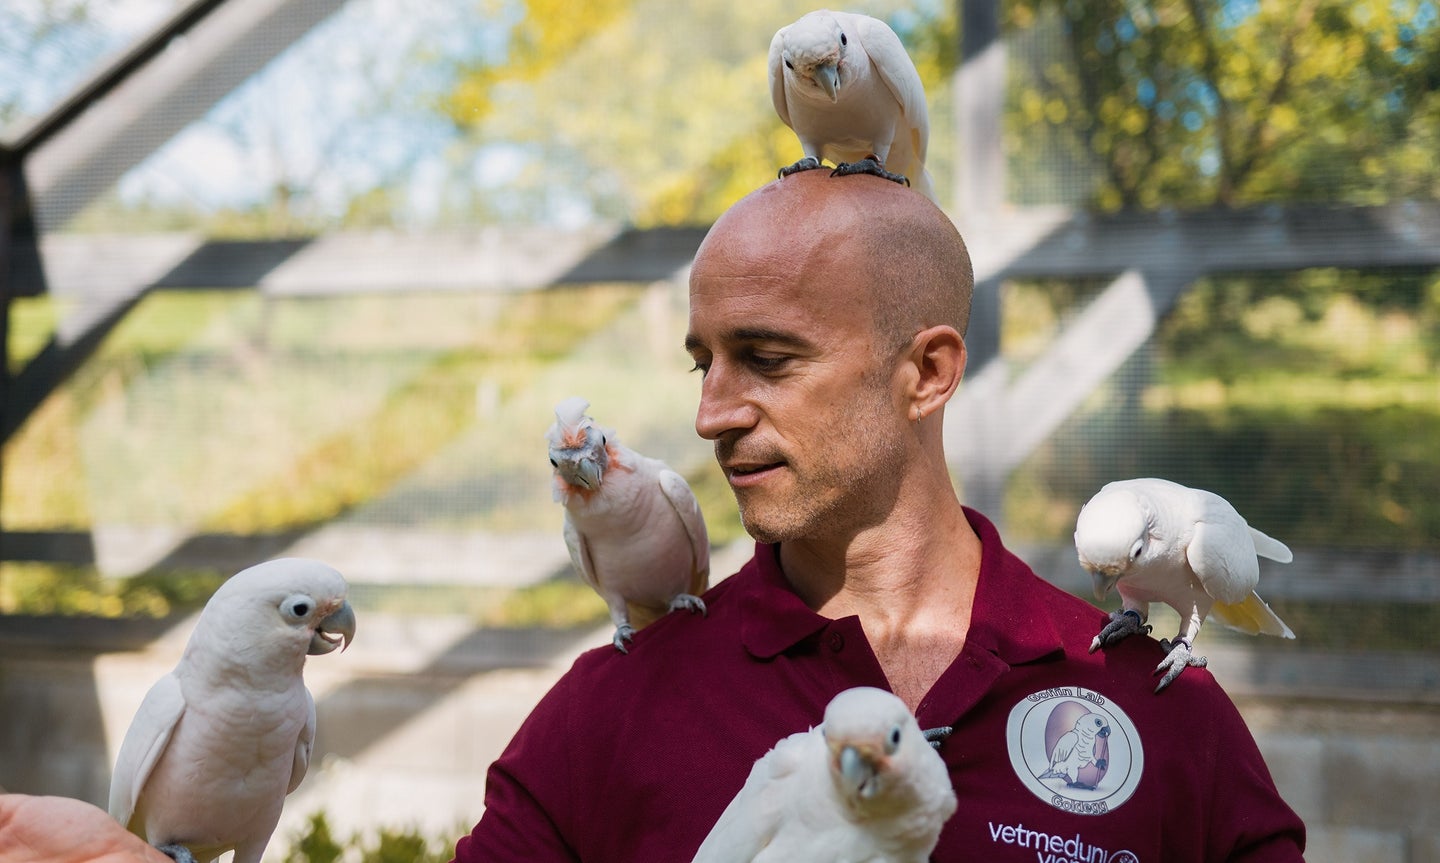 Bird intelligence researcher in maroon shirt with flock of captive Goffin's cockatoos on his arms and head